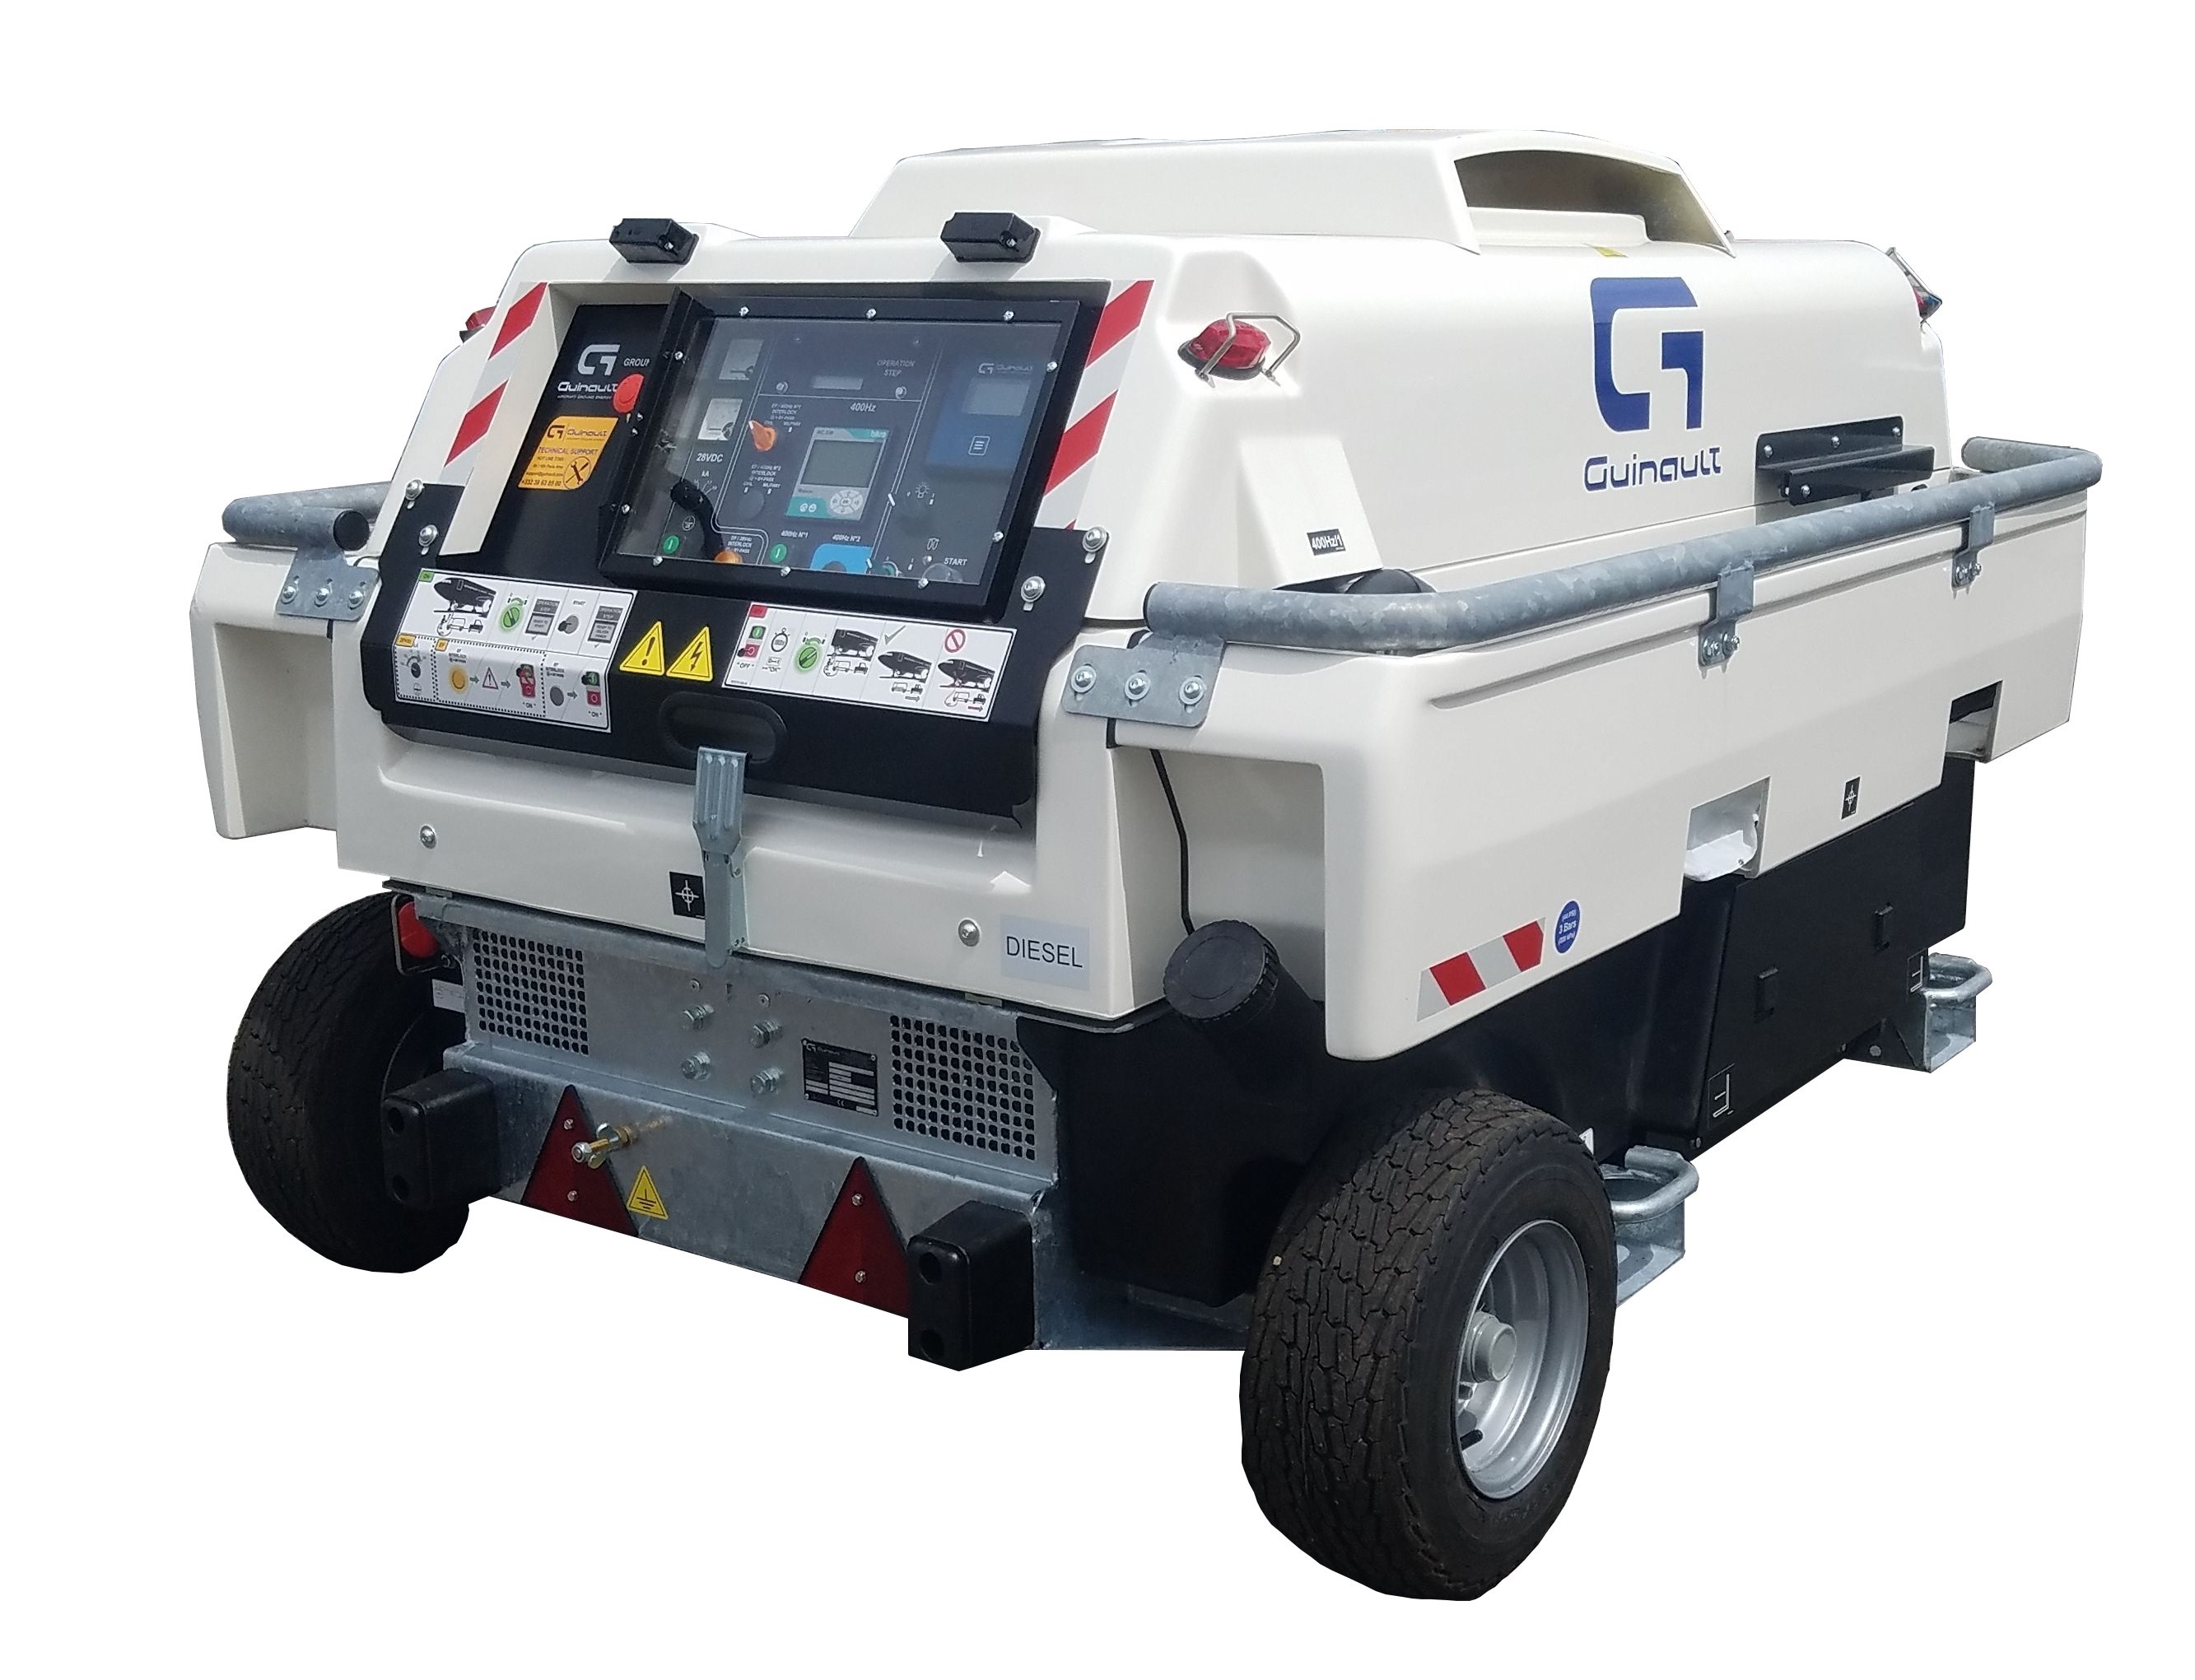 GB/GC range - Compact Mobile Ground Unit General Aviation, Business Aviation & Regional Aircraft (Diesel Engine - Airport Suppliers